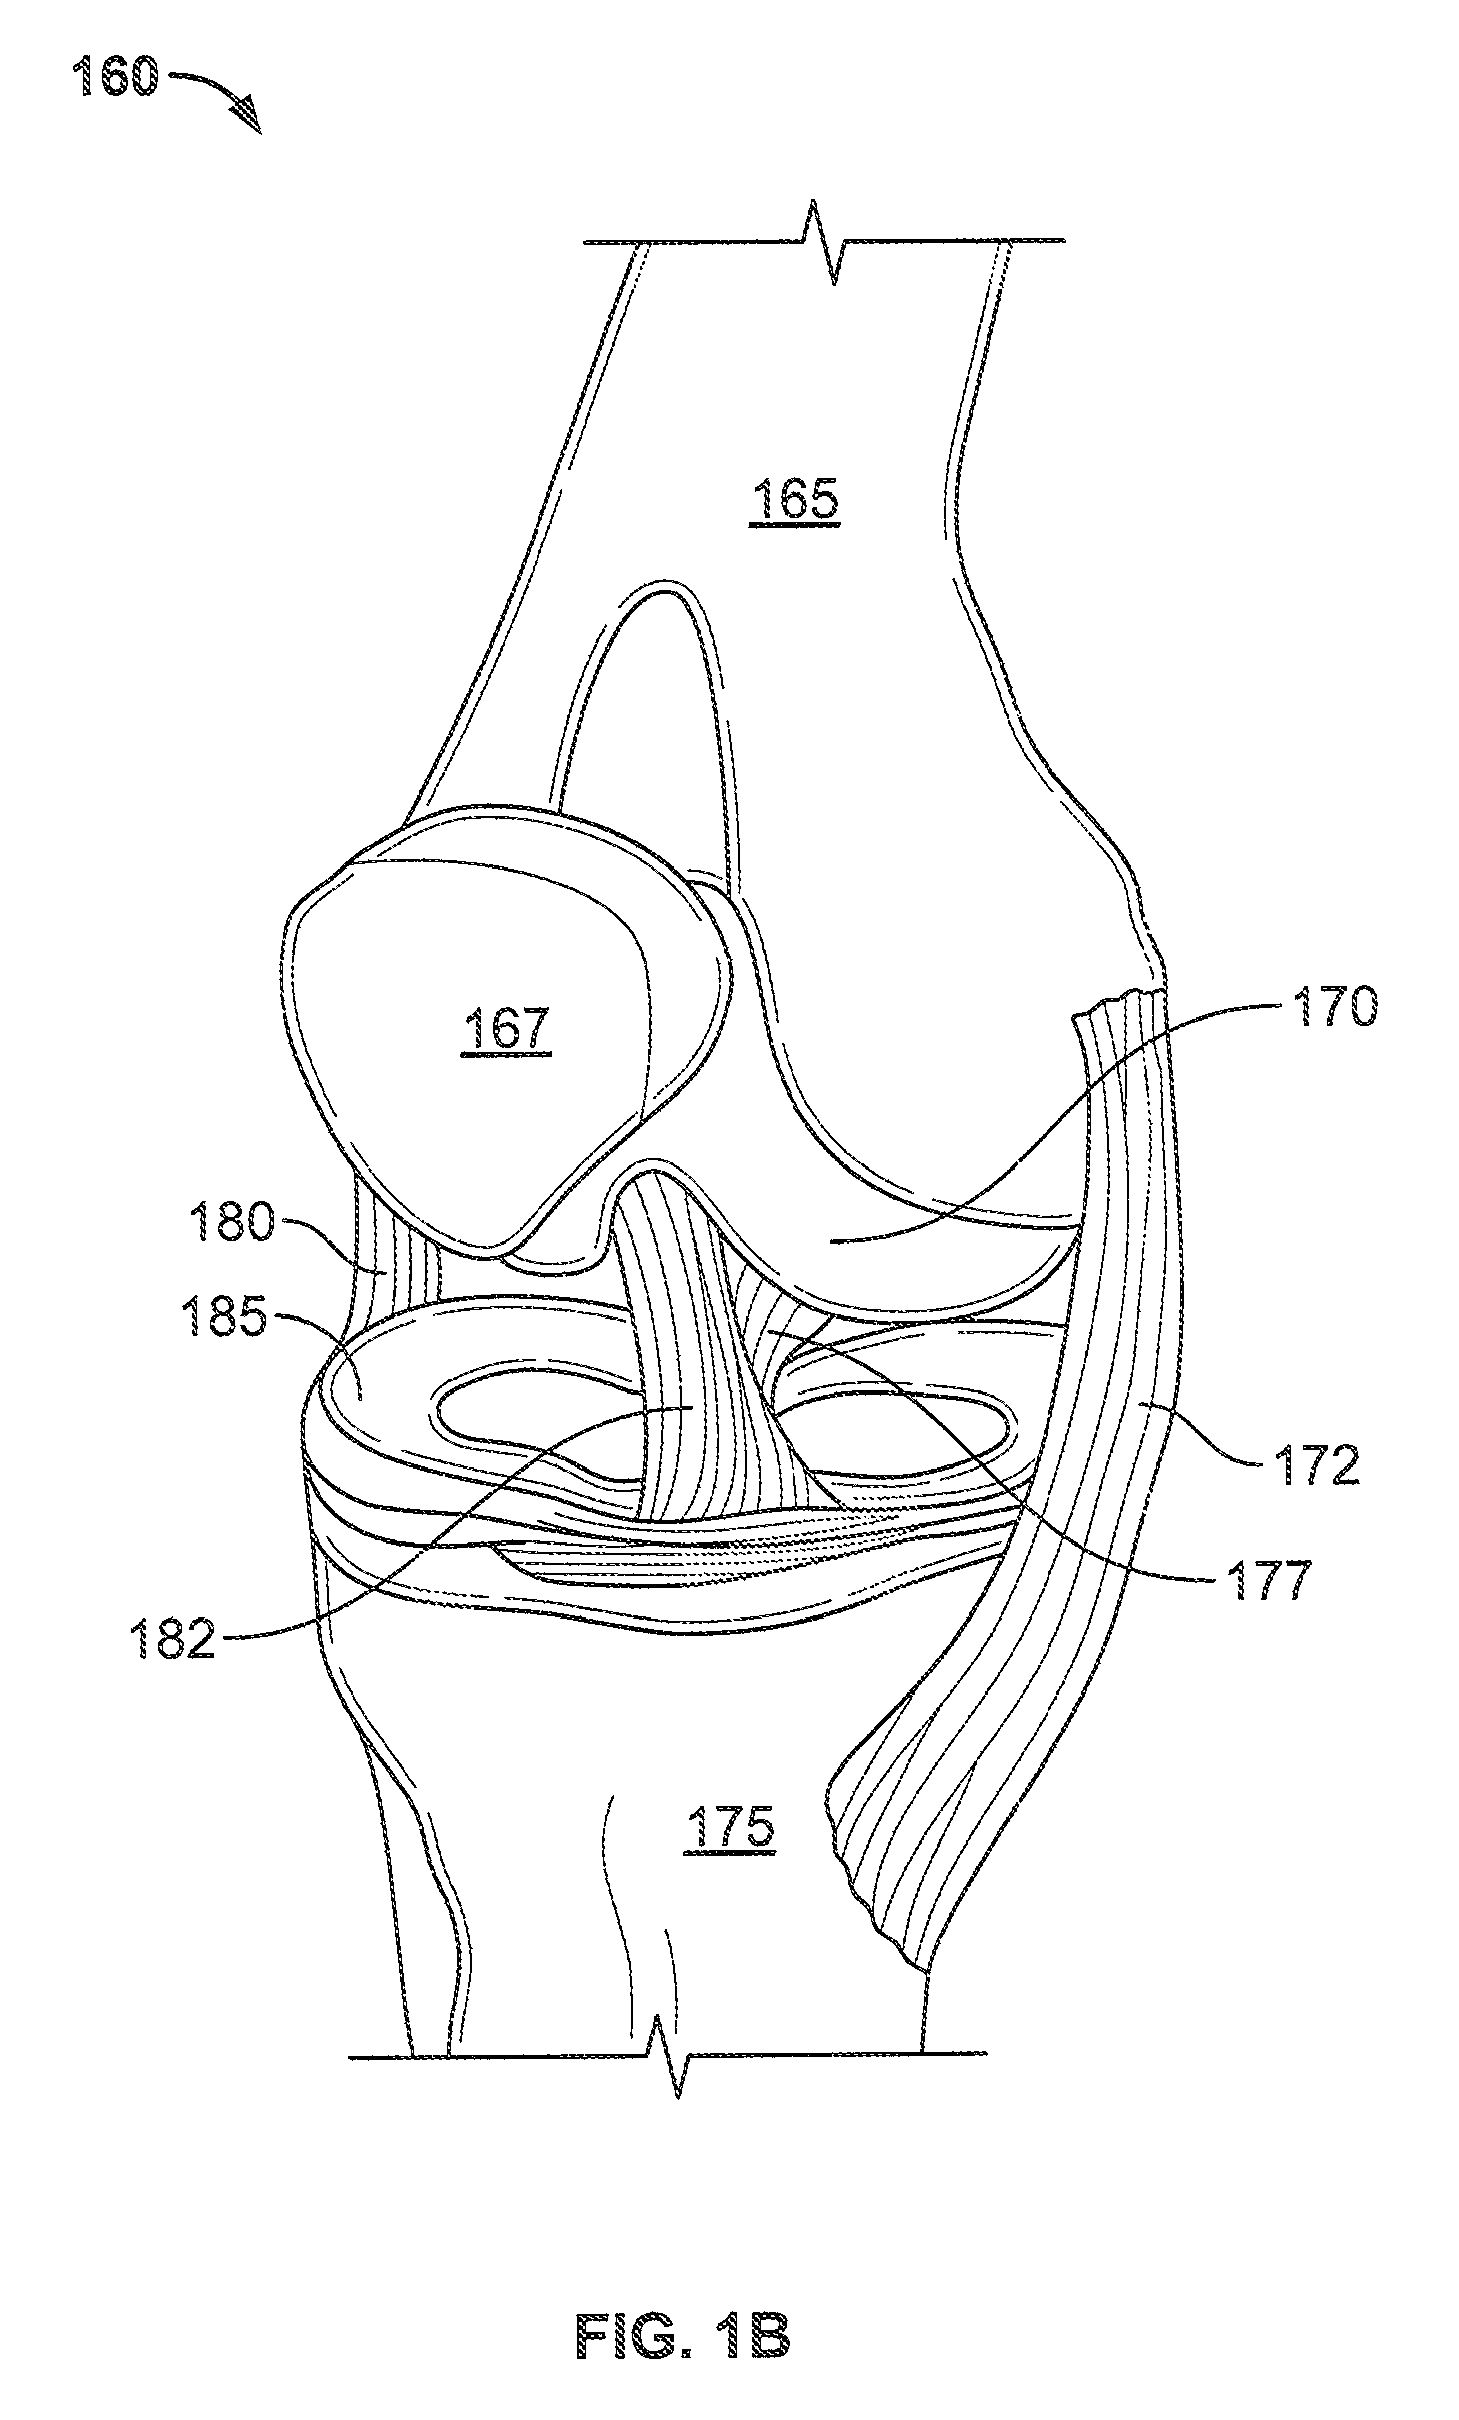 System and methods for treating or supporting human joints or a portion of the human body